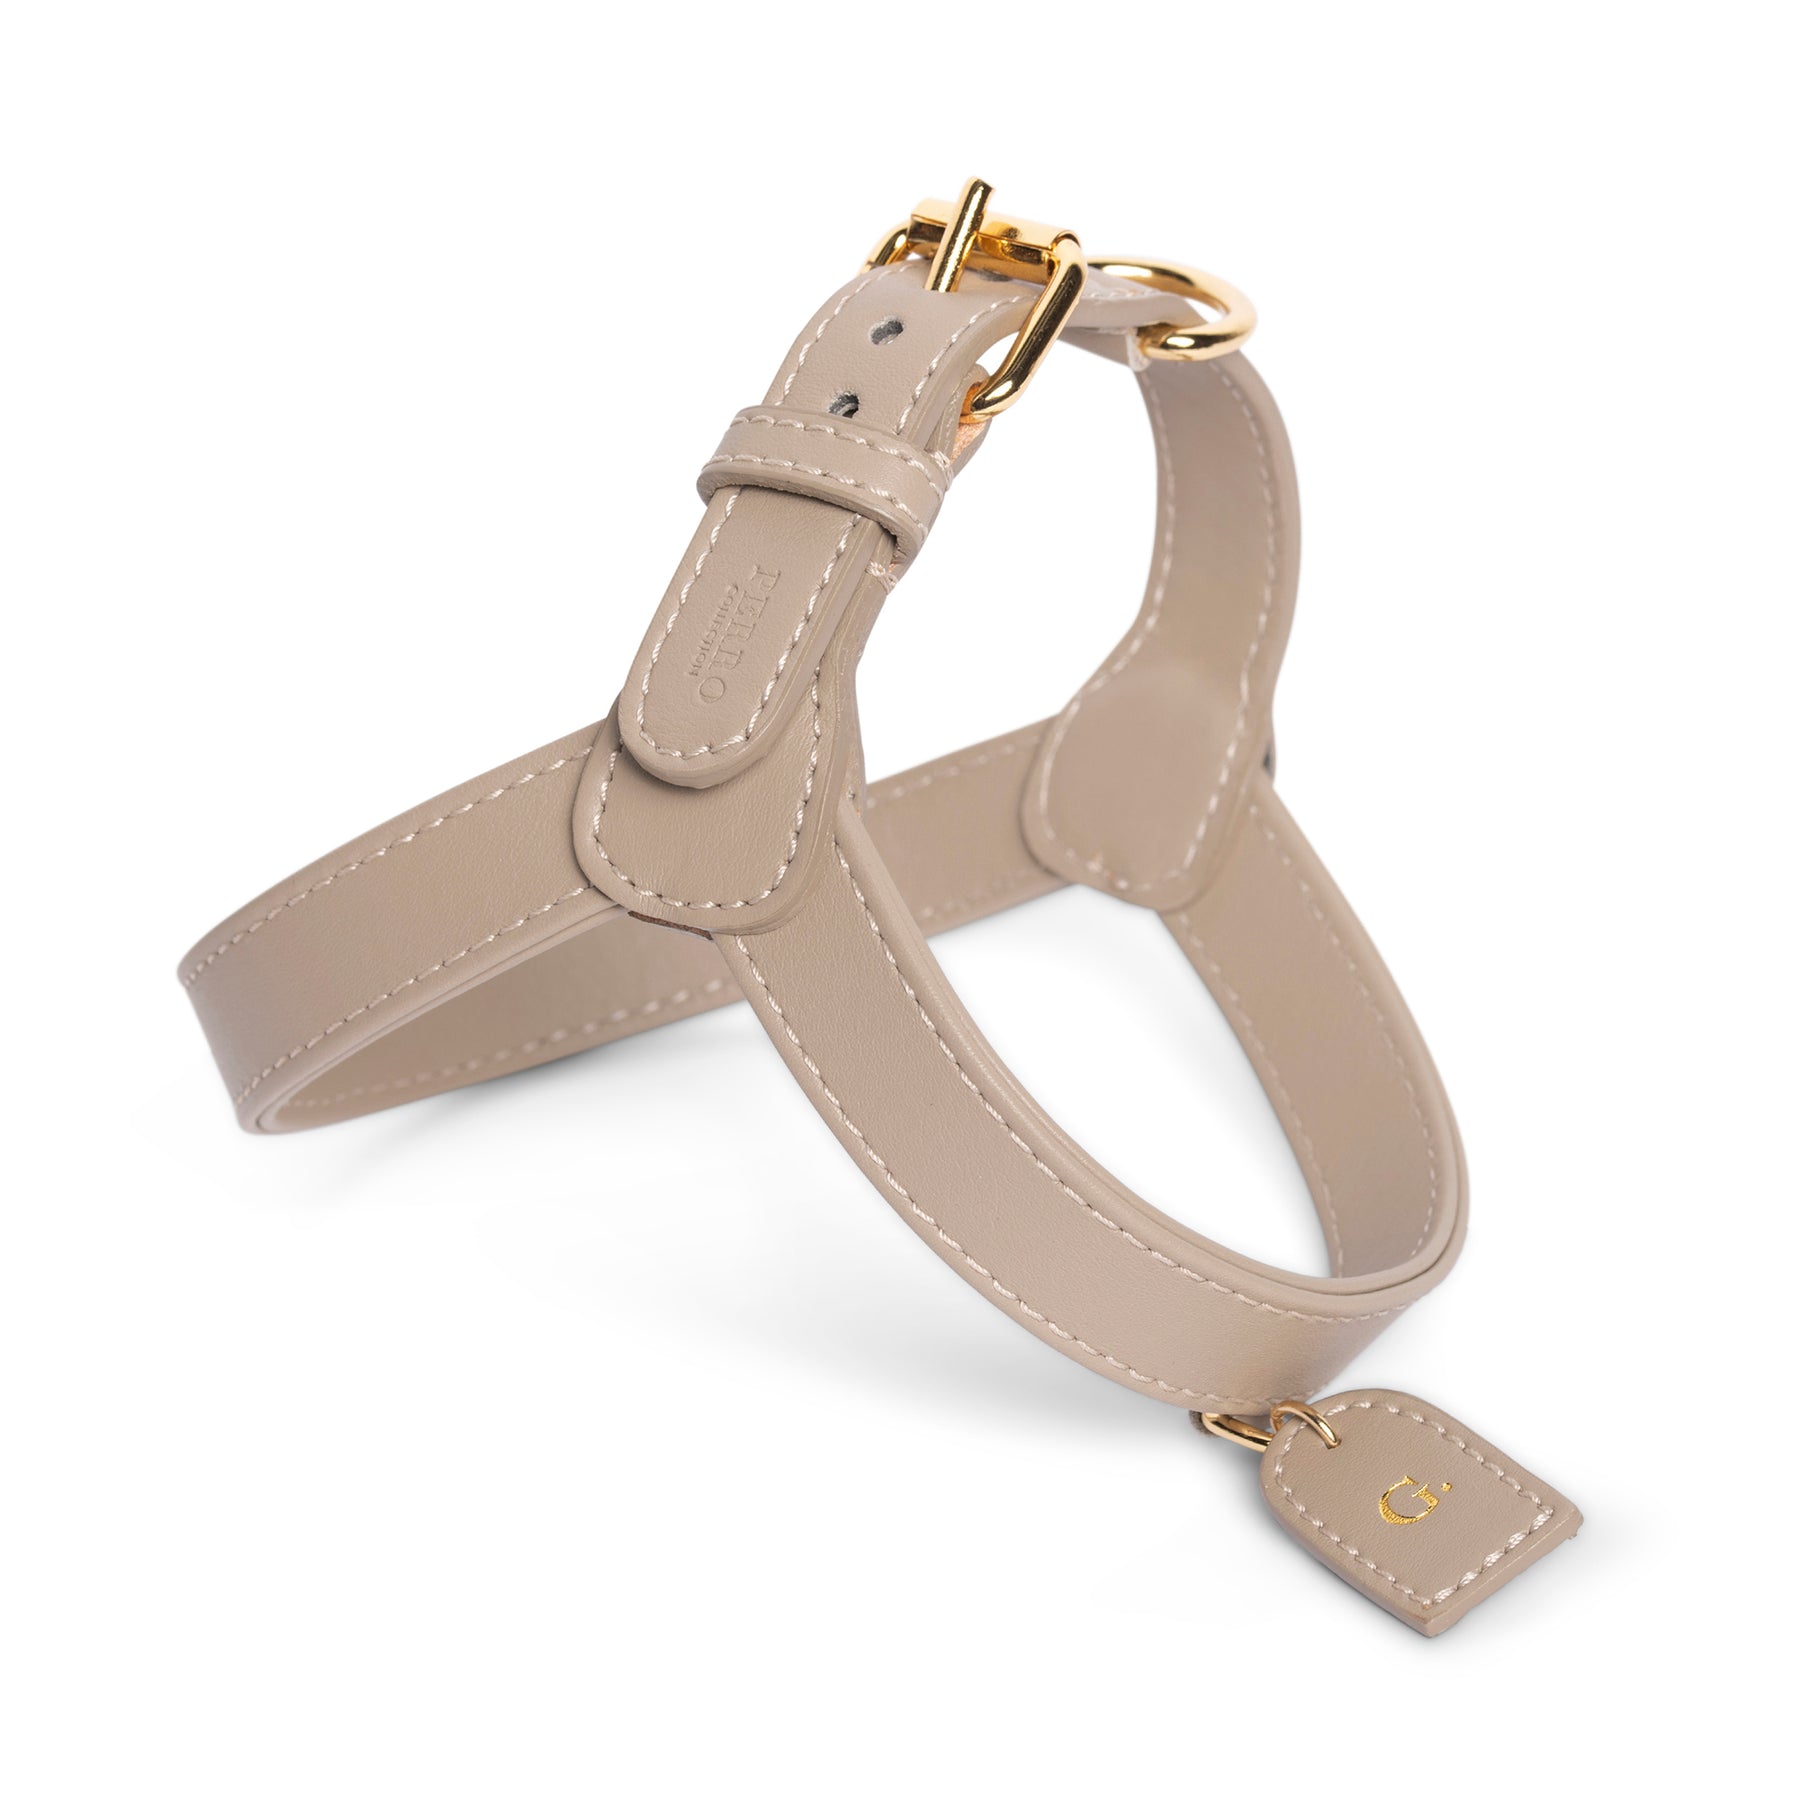 Lv Leather Harness , Leash and Collar For a Bull Dog for Sale in